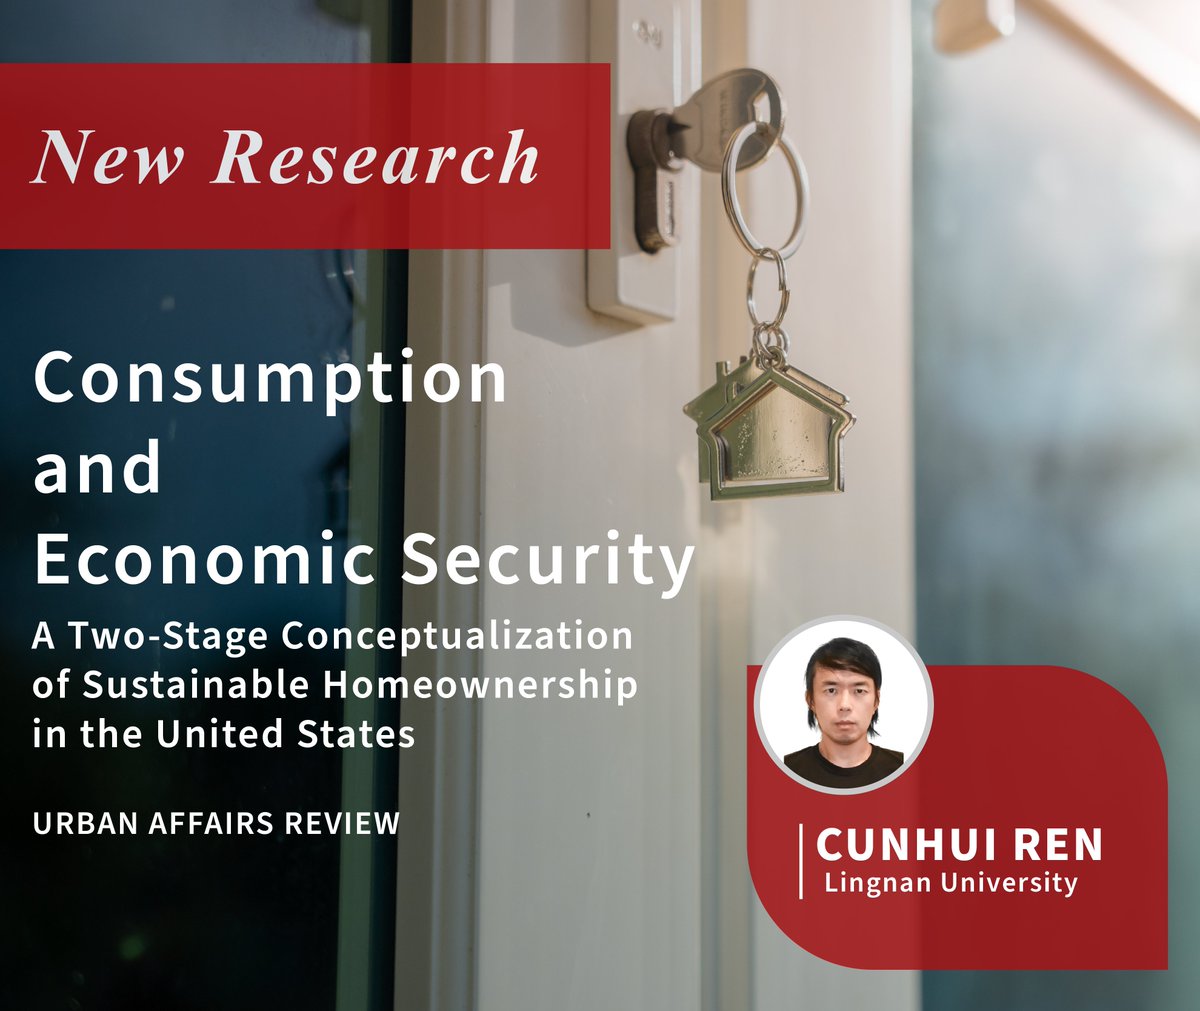 New research from Faculty Associate Chunhui Ren (@LingnanUni) finds that liquid #wealth is the #1 determinant of whether 1st-time homeowners avoid going back to renting. Read more at @UrbanAffairsRev: doi.org/10.1177/107808… #PSID #EconomicSecurity #UrbanAffairs #Homeownership